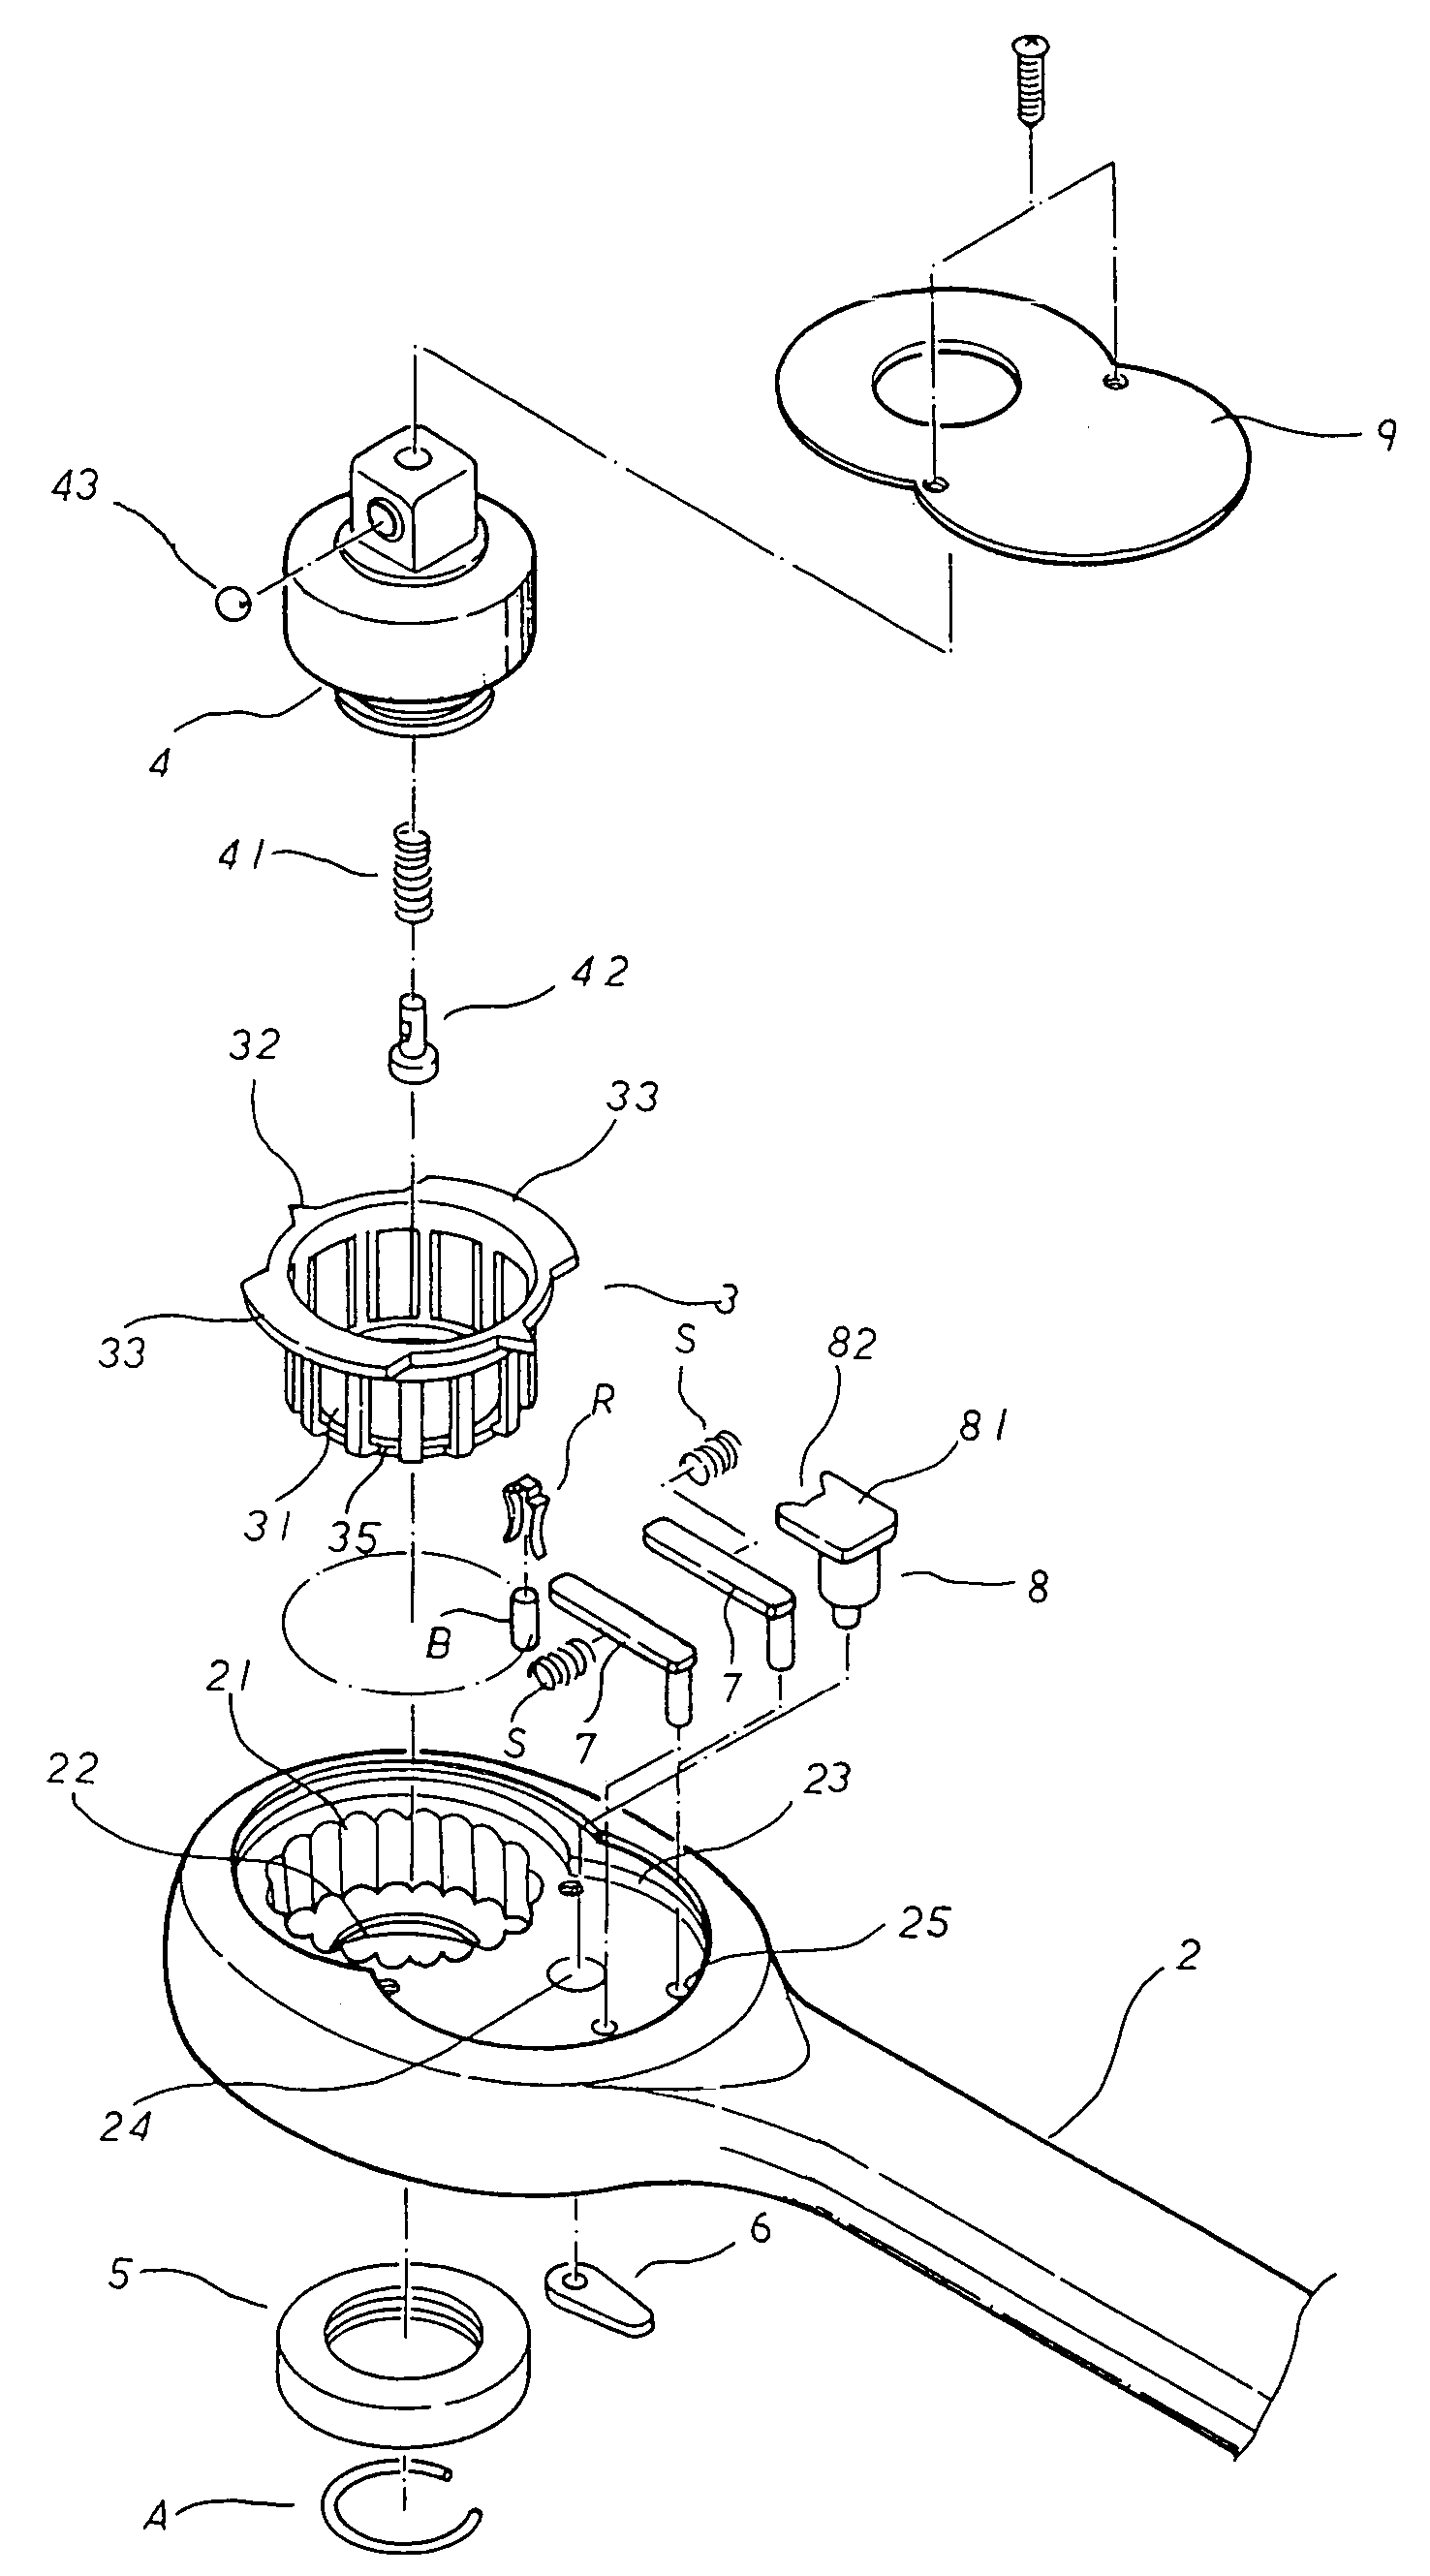 Control mechanism for a socket wrench